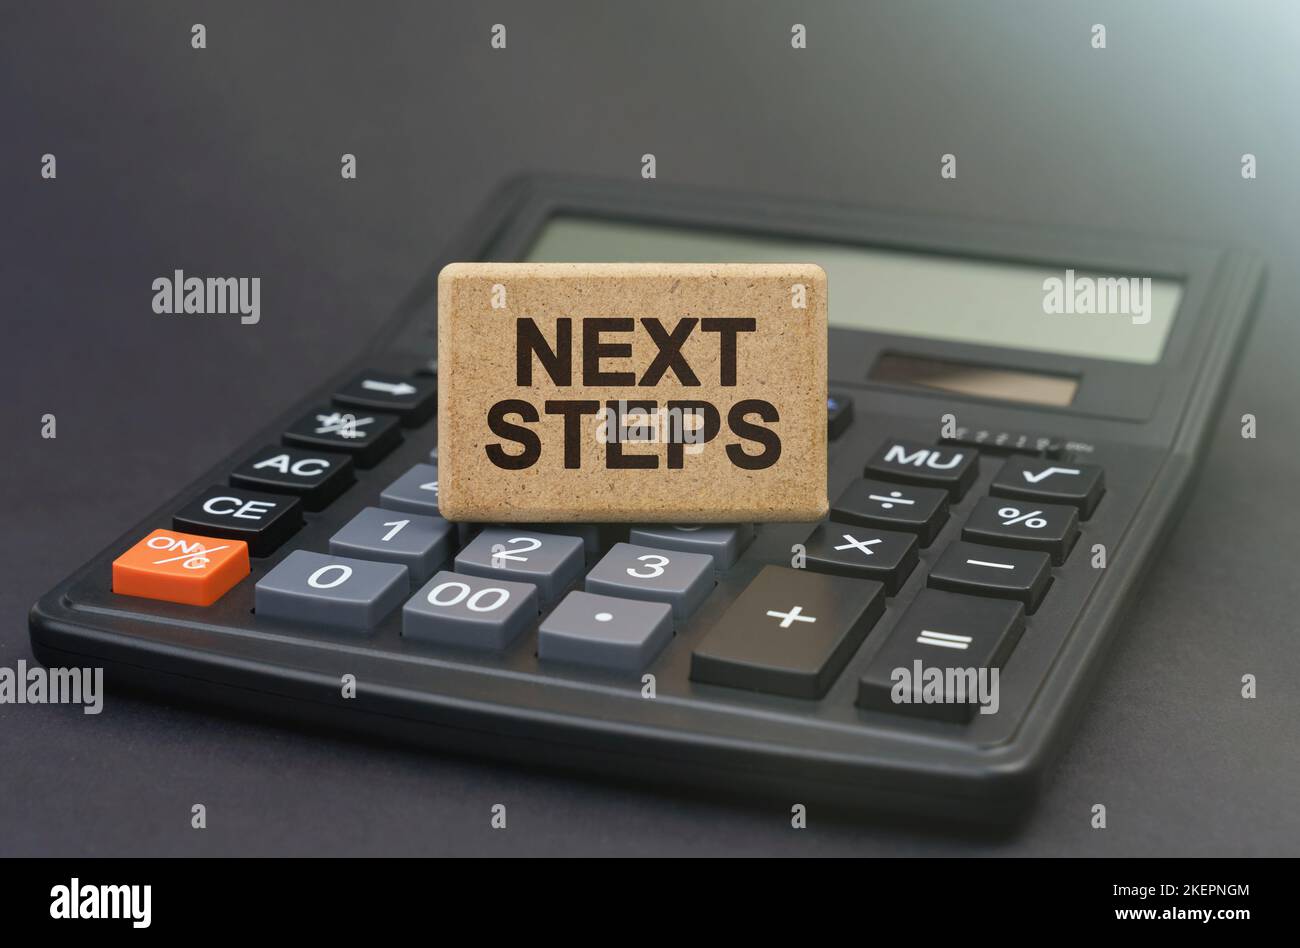 Business concept. There is a sign on the calculator that says - NEXT STEPS Stock Photo